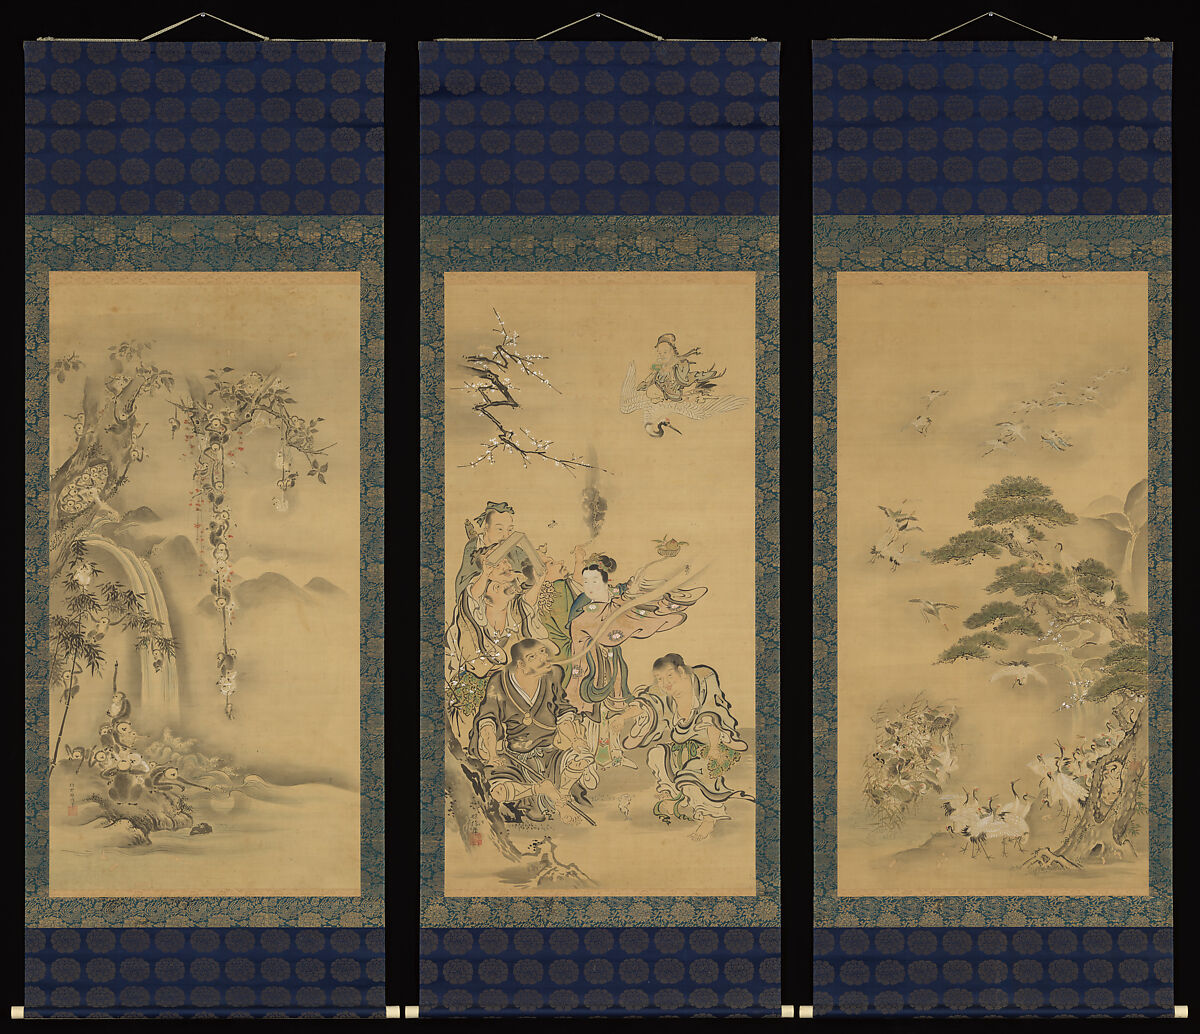 Eight Daoist Immortals, Cranes, and Gibbons, Kano Tanshin (Morimasa), Triptych of hanging scrolls; ink and color on silk, Japan